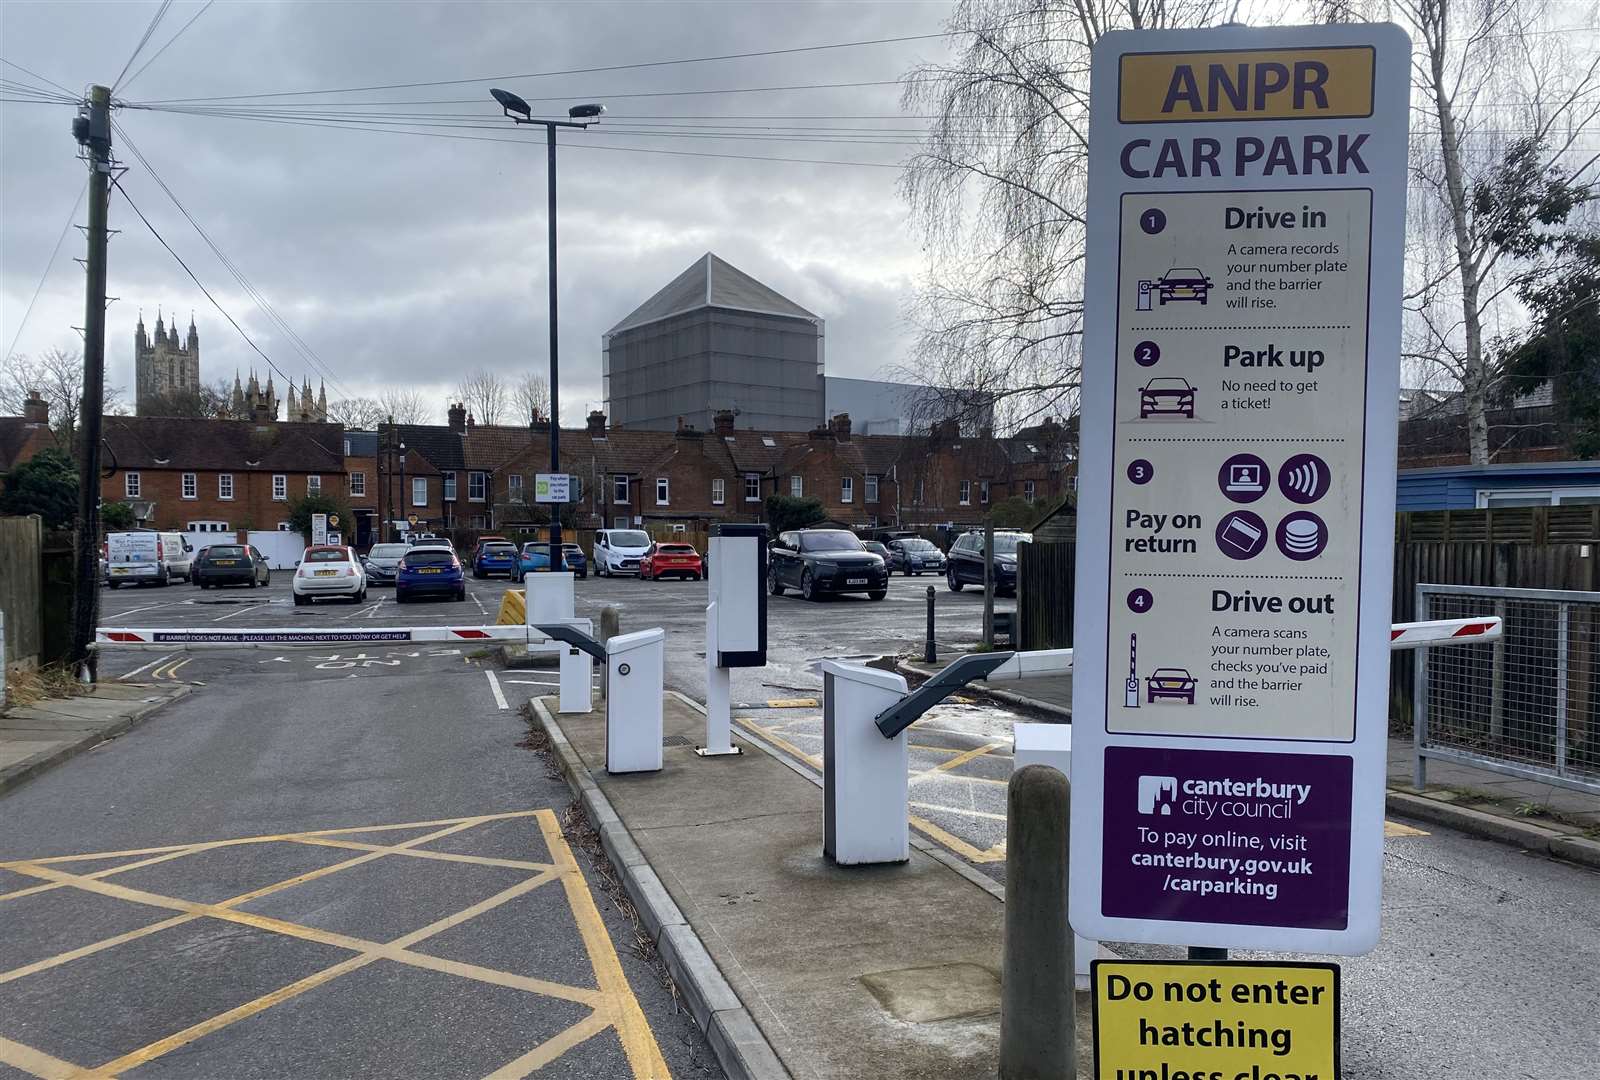 Charges in Pound Lane car park in Canterbury will increase from £2.50 to £3.70